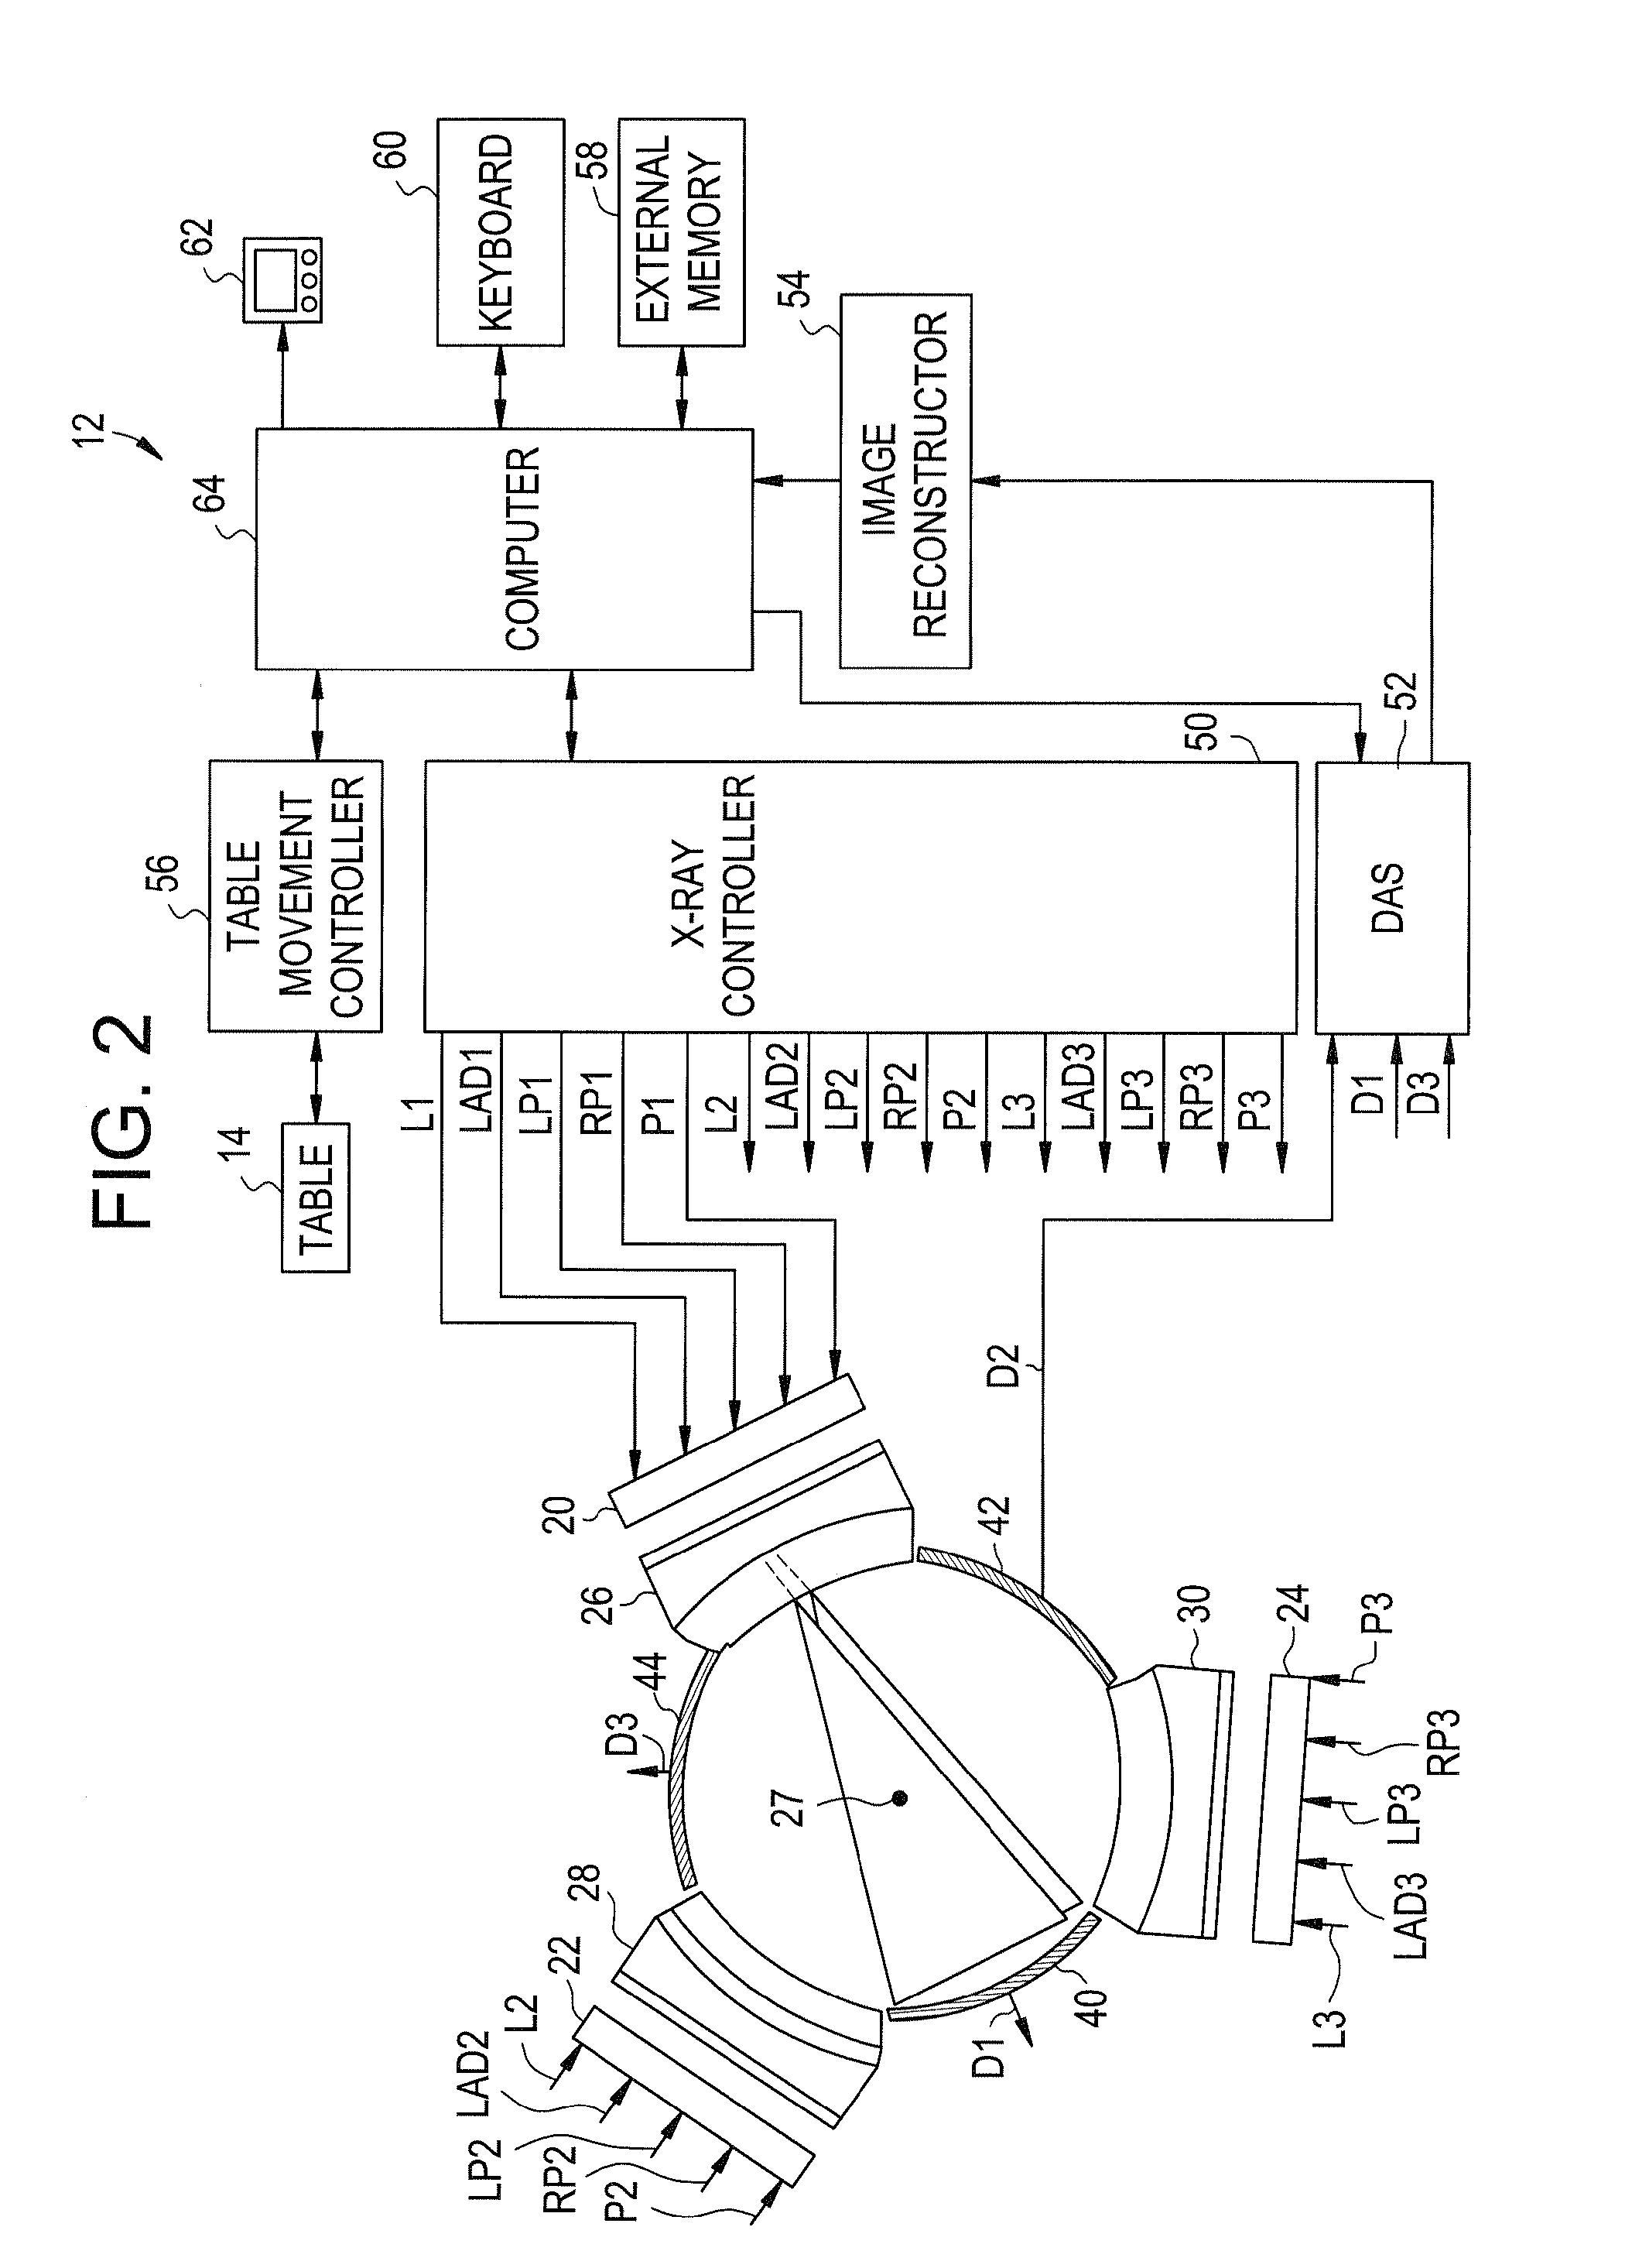 Electron emitter assembly and method for generating electron beams